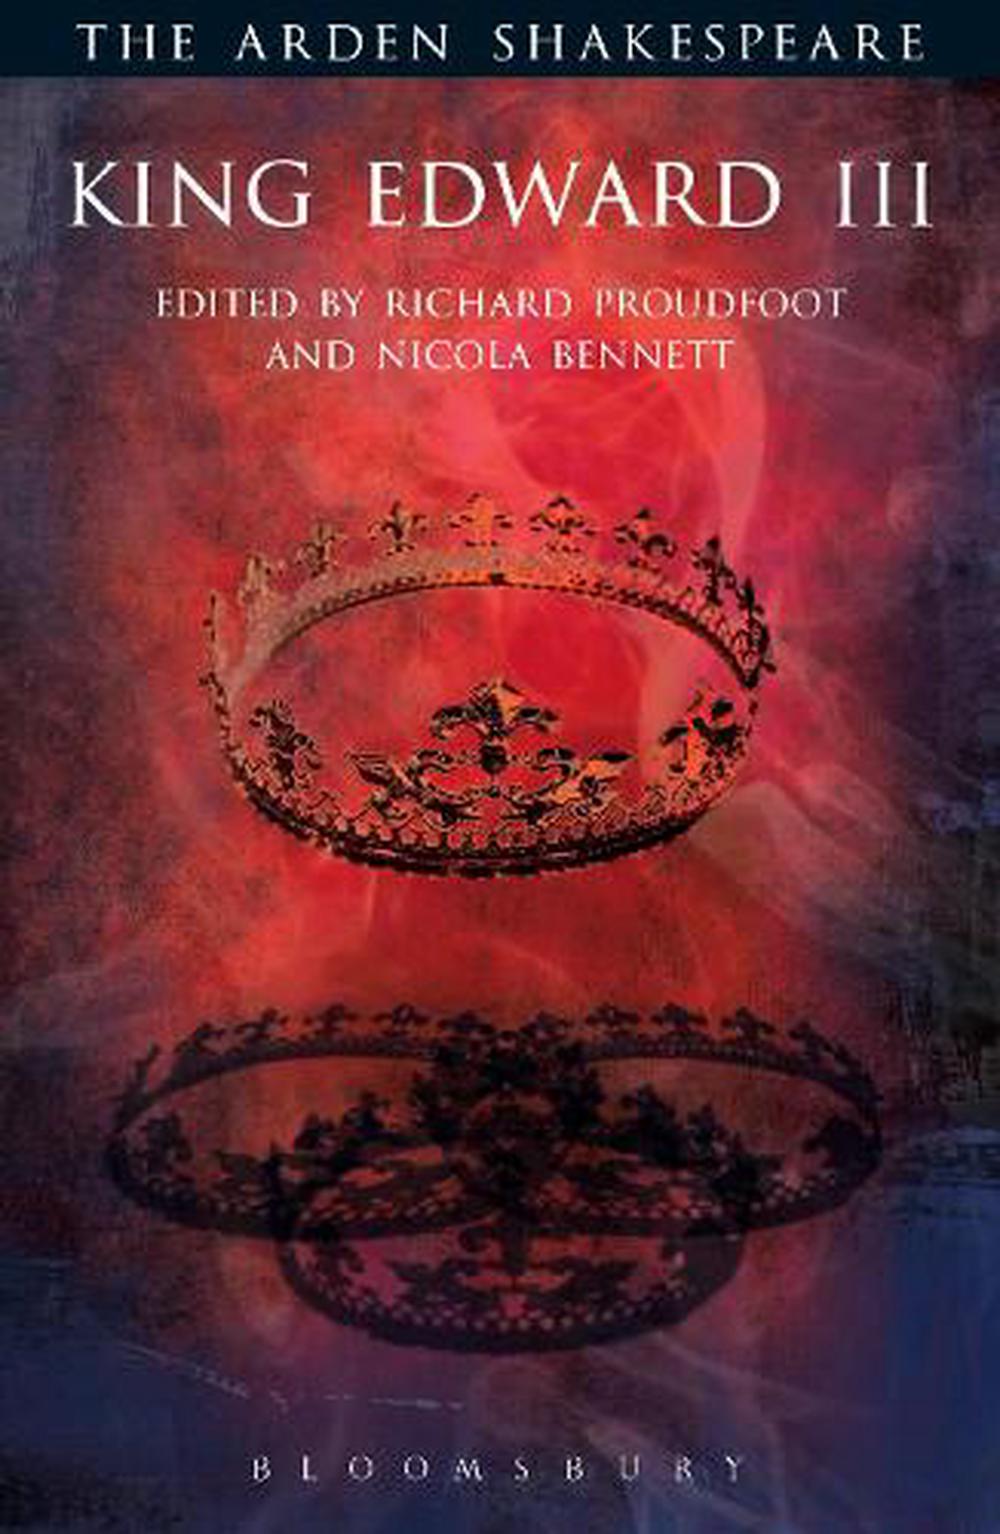 William　online　Paperback,　King　Buy　9781903436387　at　by　Edward　III　Nile　Shakespeare,　The